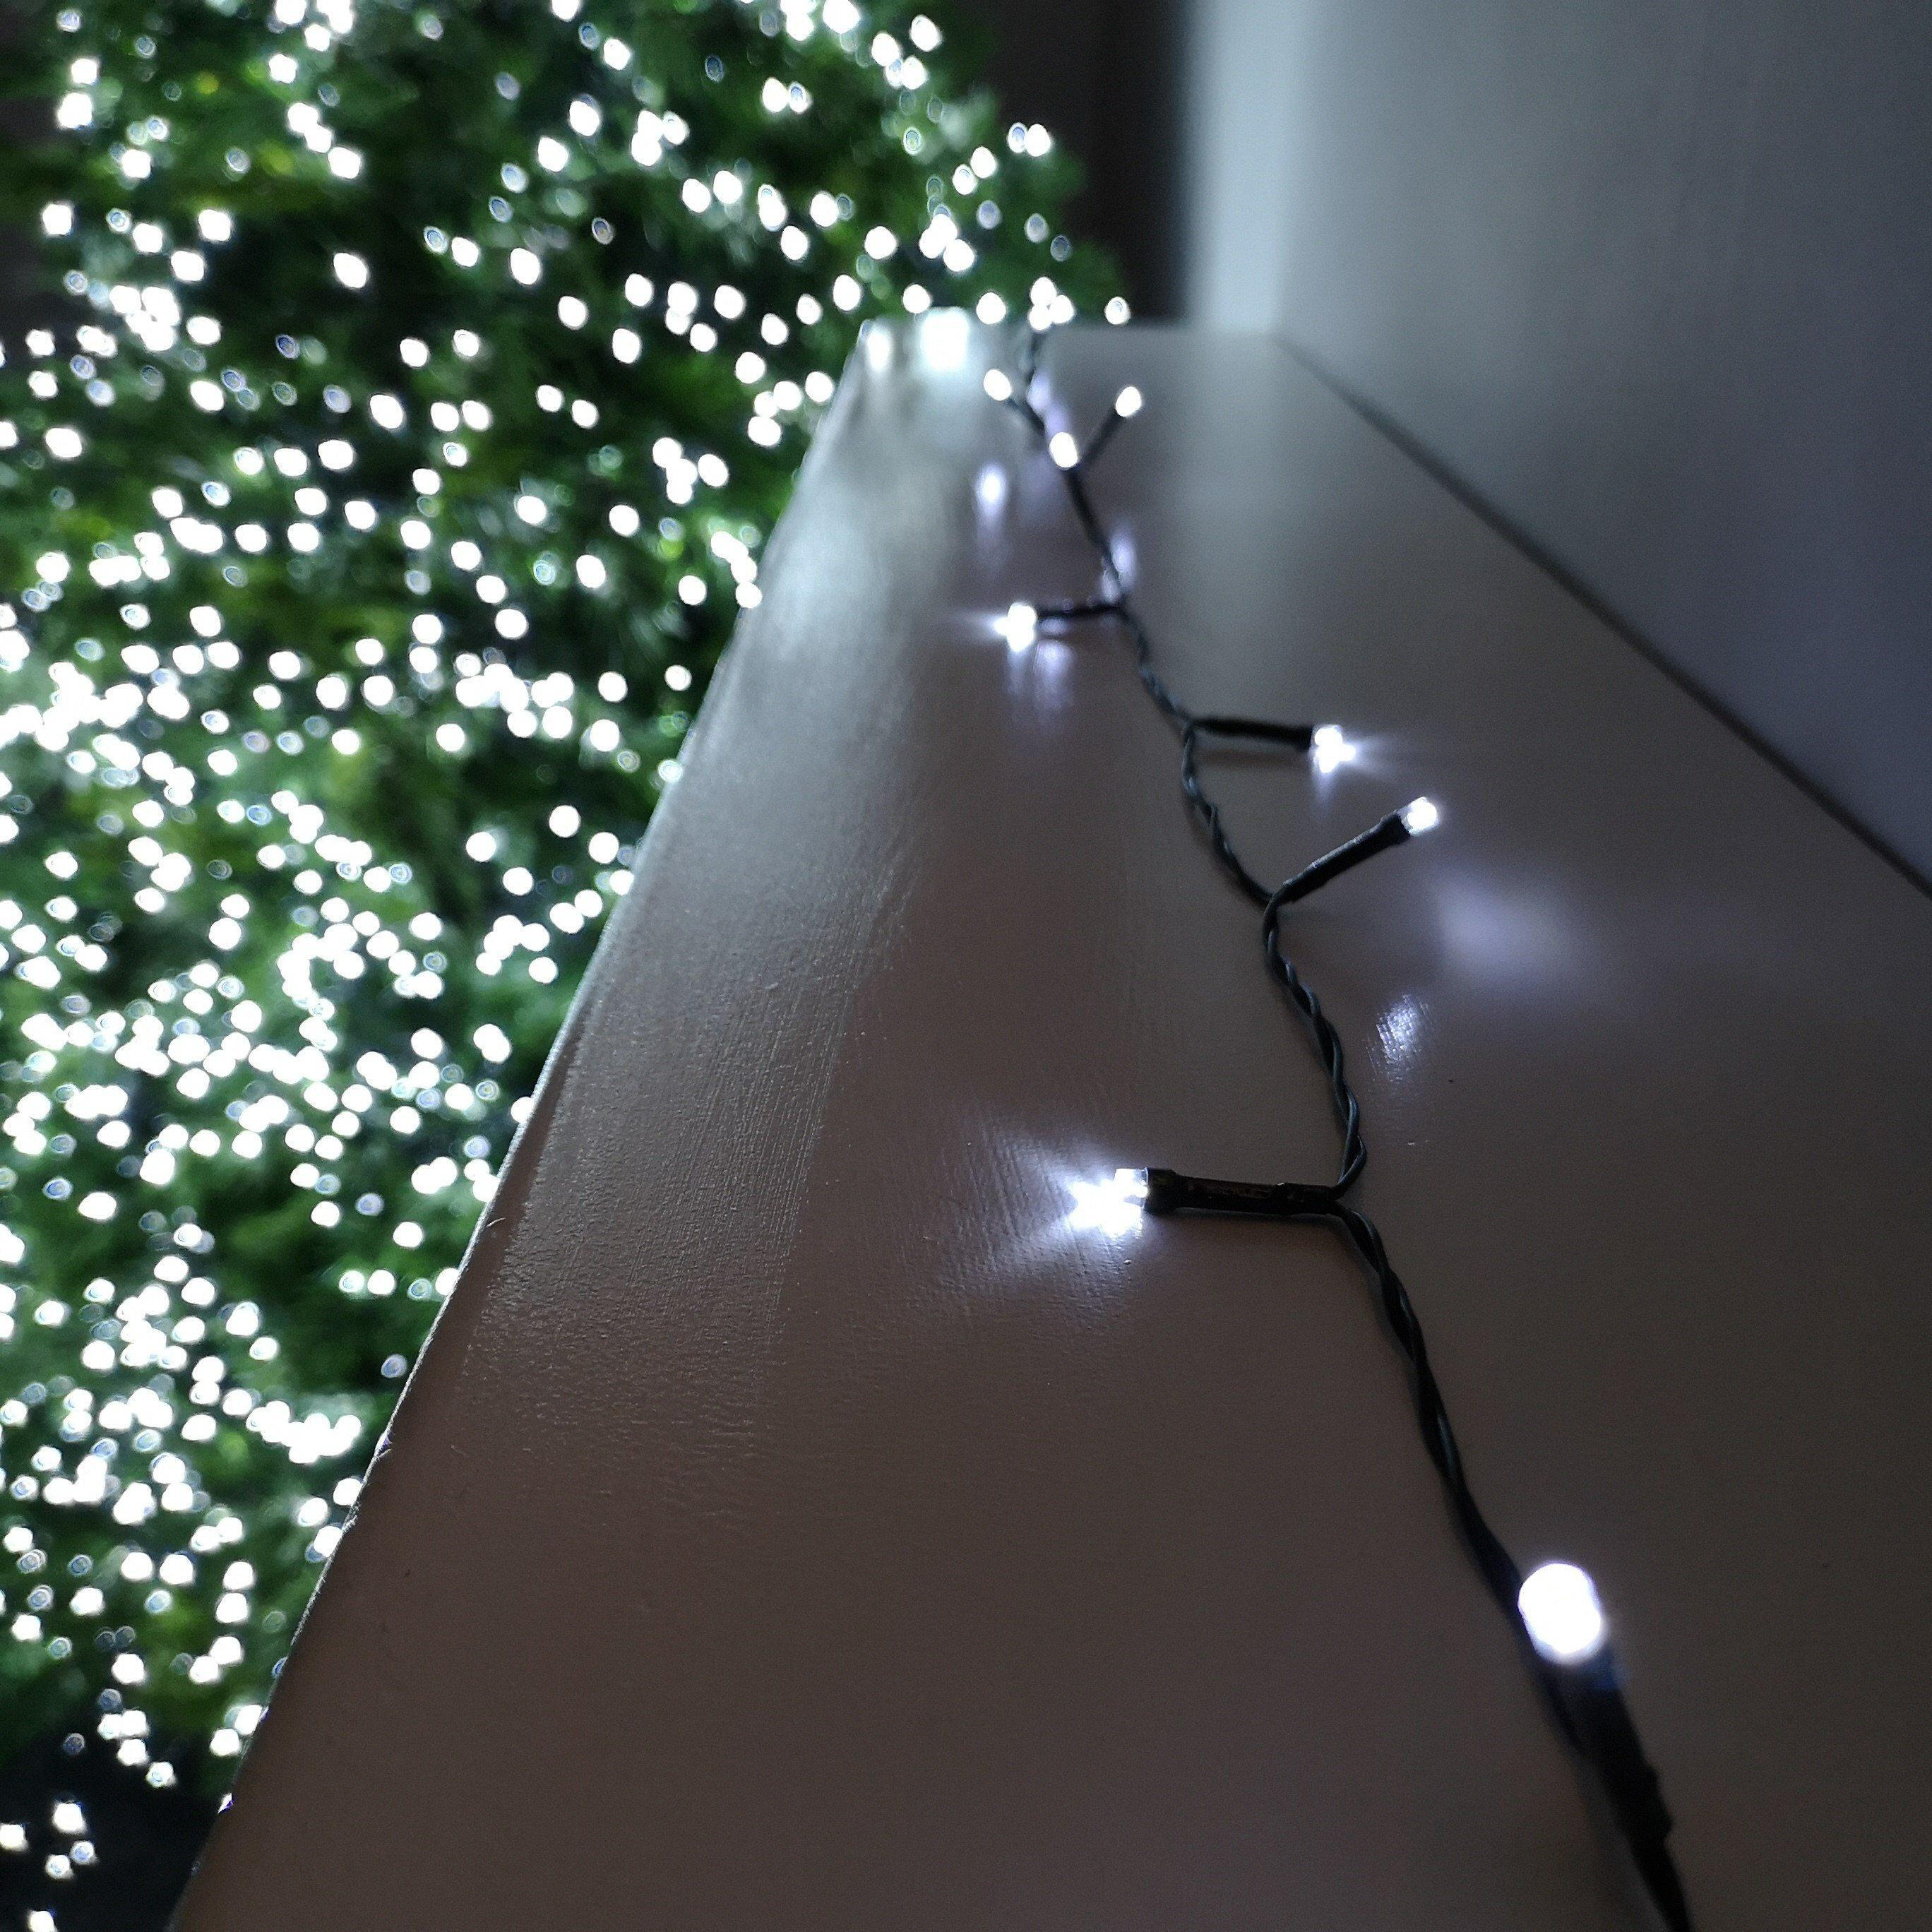 24 LED 2.3m Premier Christmas Indoor Outdoor Multi Function Battery Operated String Lights with Timer in Cool White - image 1